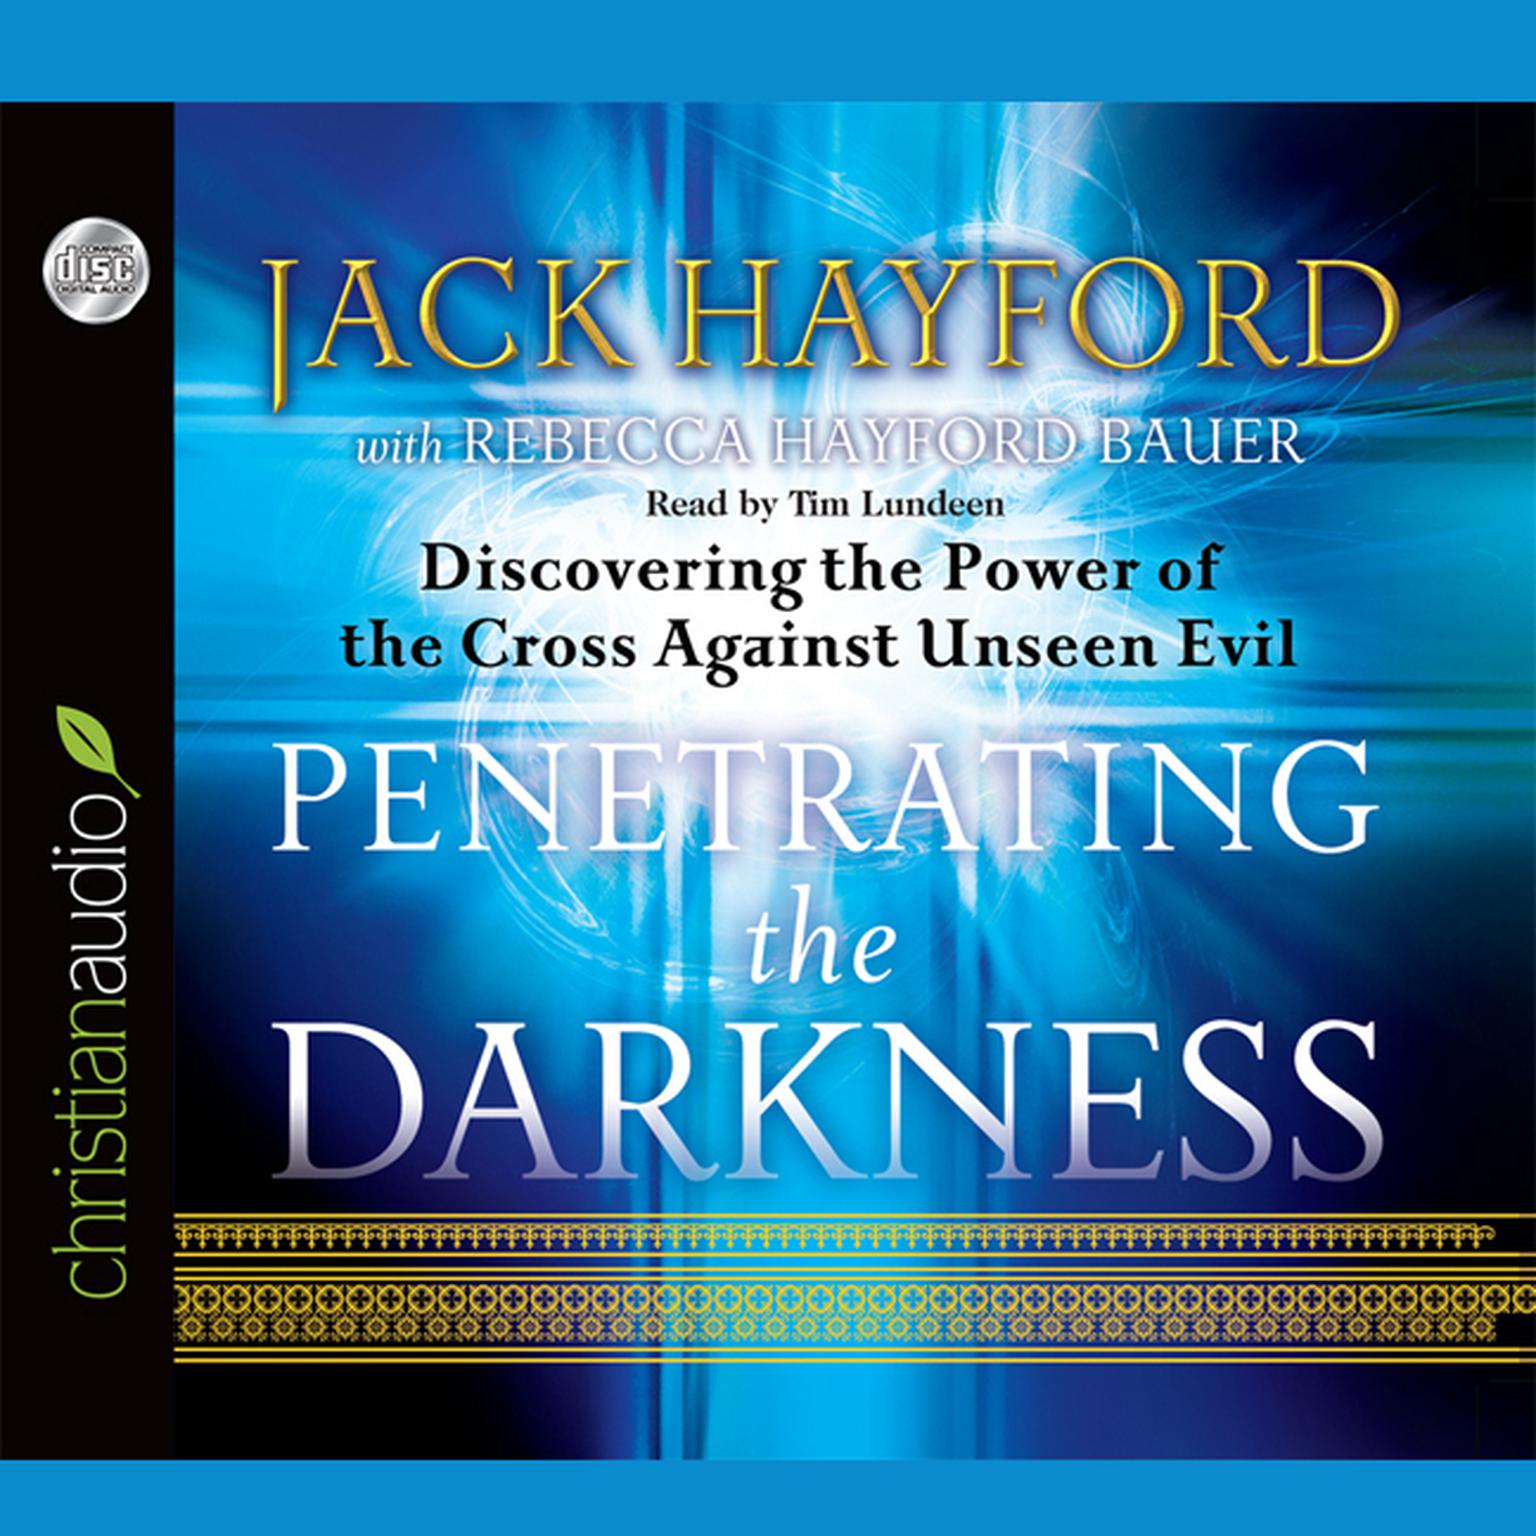 Penetrating the Darkness: Discovering the Power of the Cross Against Unseen Evil Audiobook, by Jack Hayford